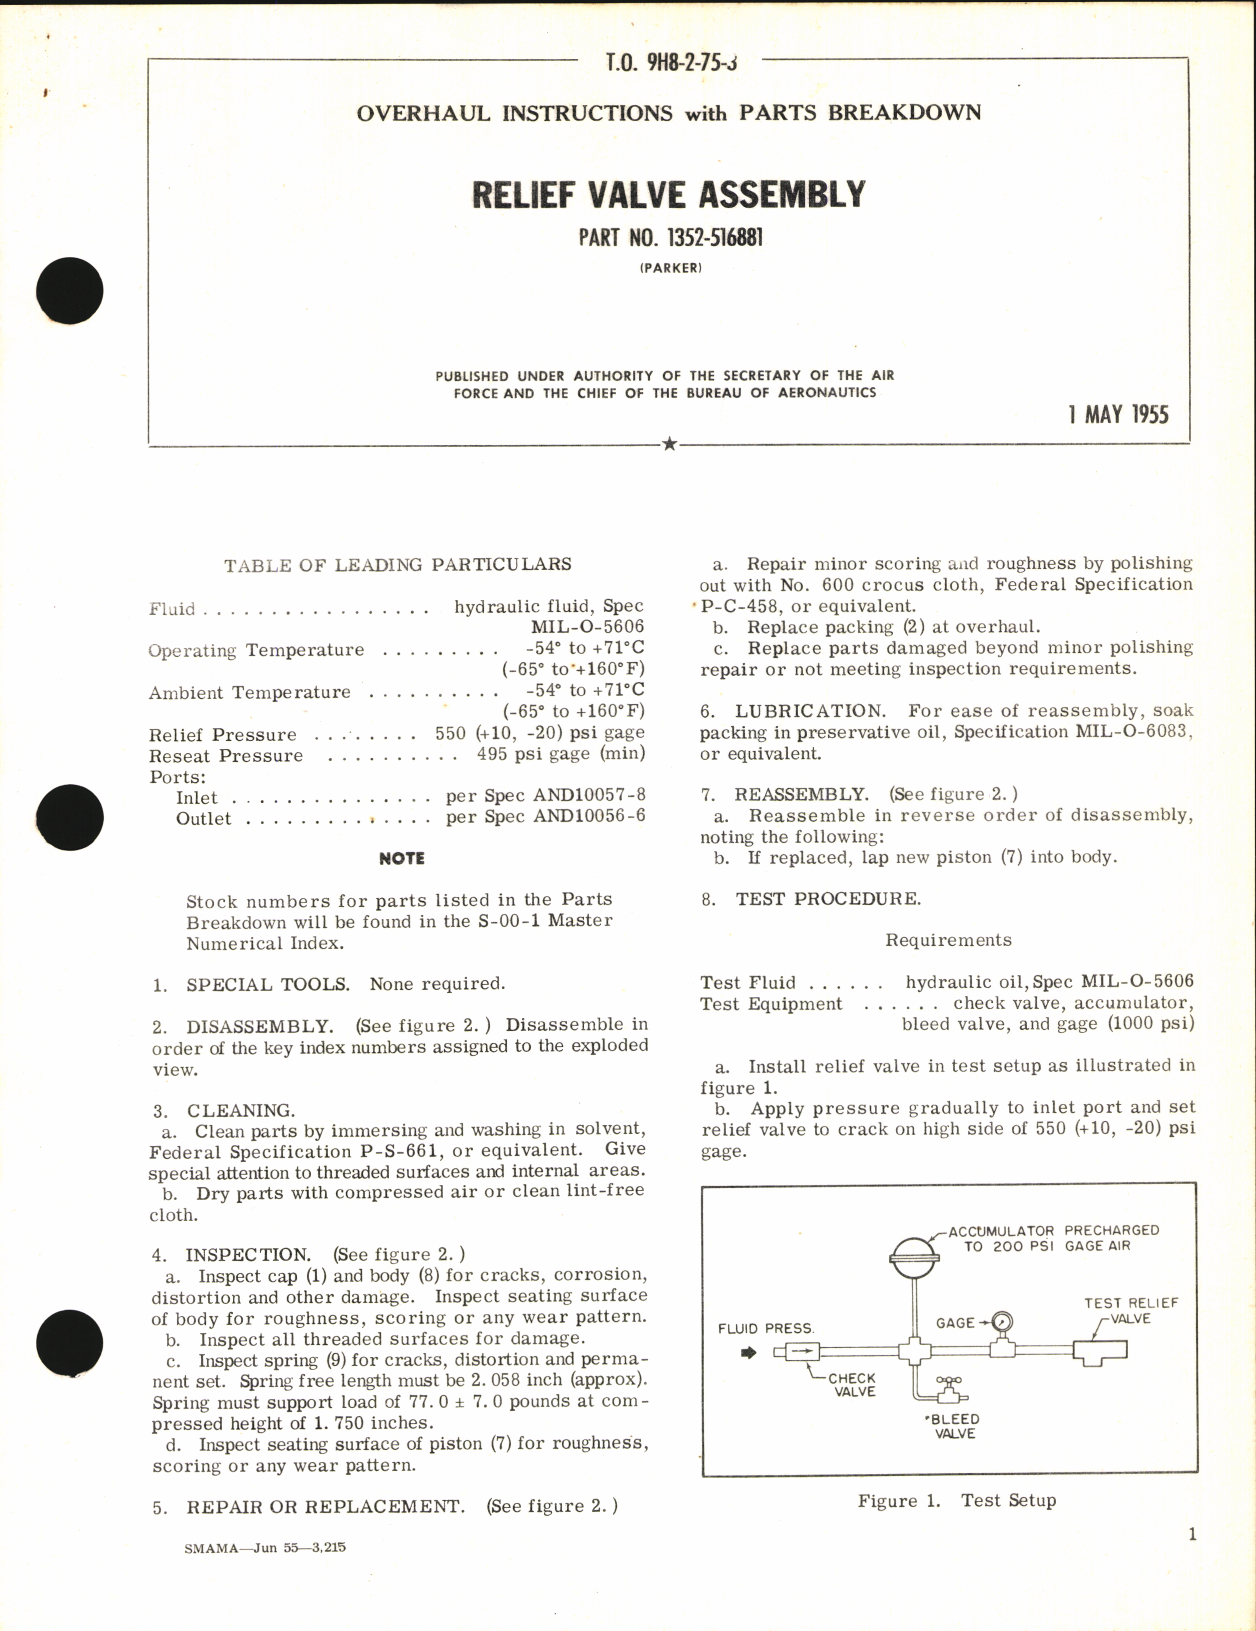 Sample page 1 from AirCorps Library document: Overhaul Instructions with Parts Breakdown for relief Valve Assembly Part No. 1352-516881